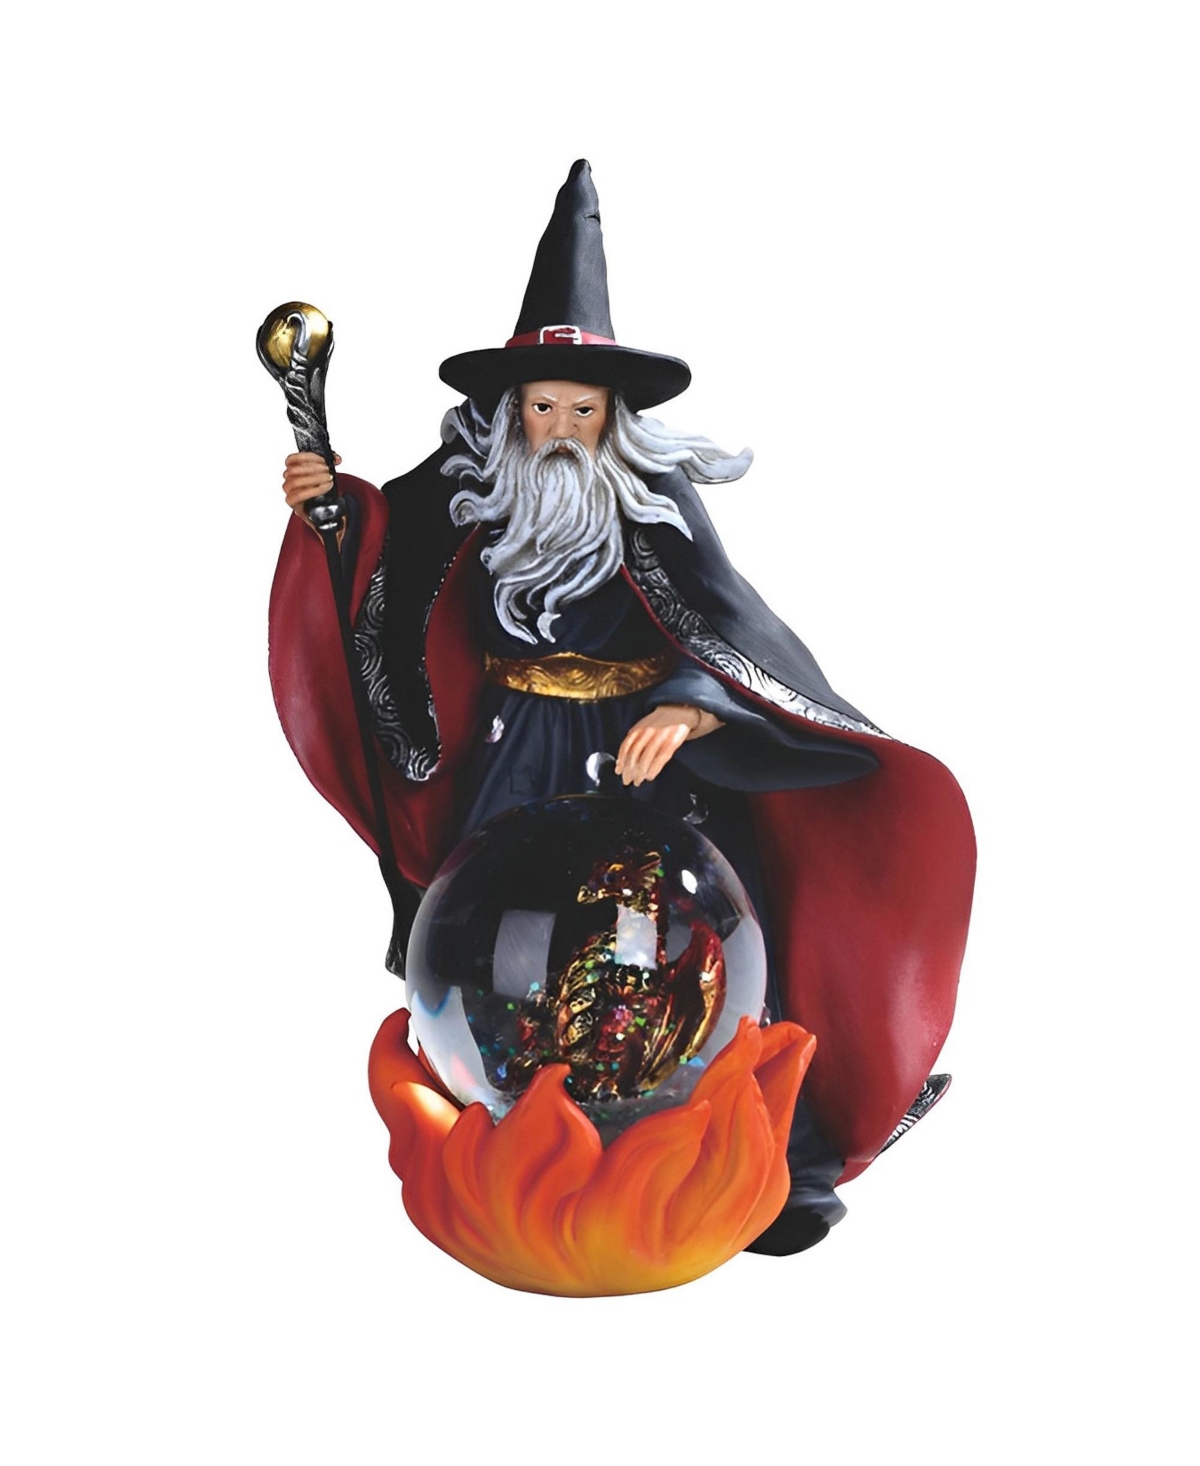 8.25"H Wizard Glitter Snow Globe Figurine Home Decor Perfect Gift for House Warming, Holidays and Birthdays - Multicolor